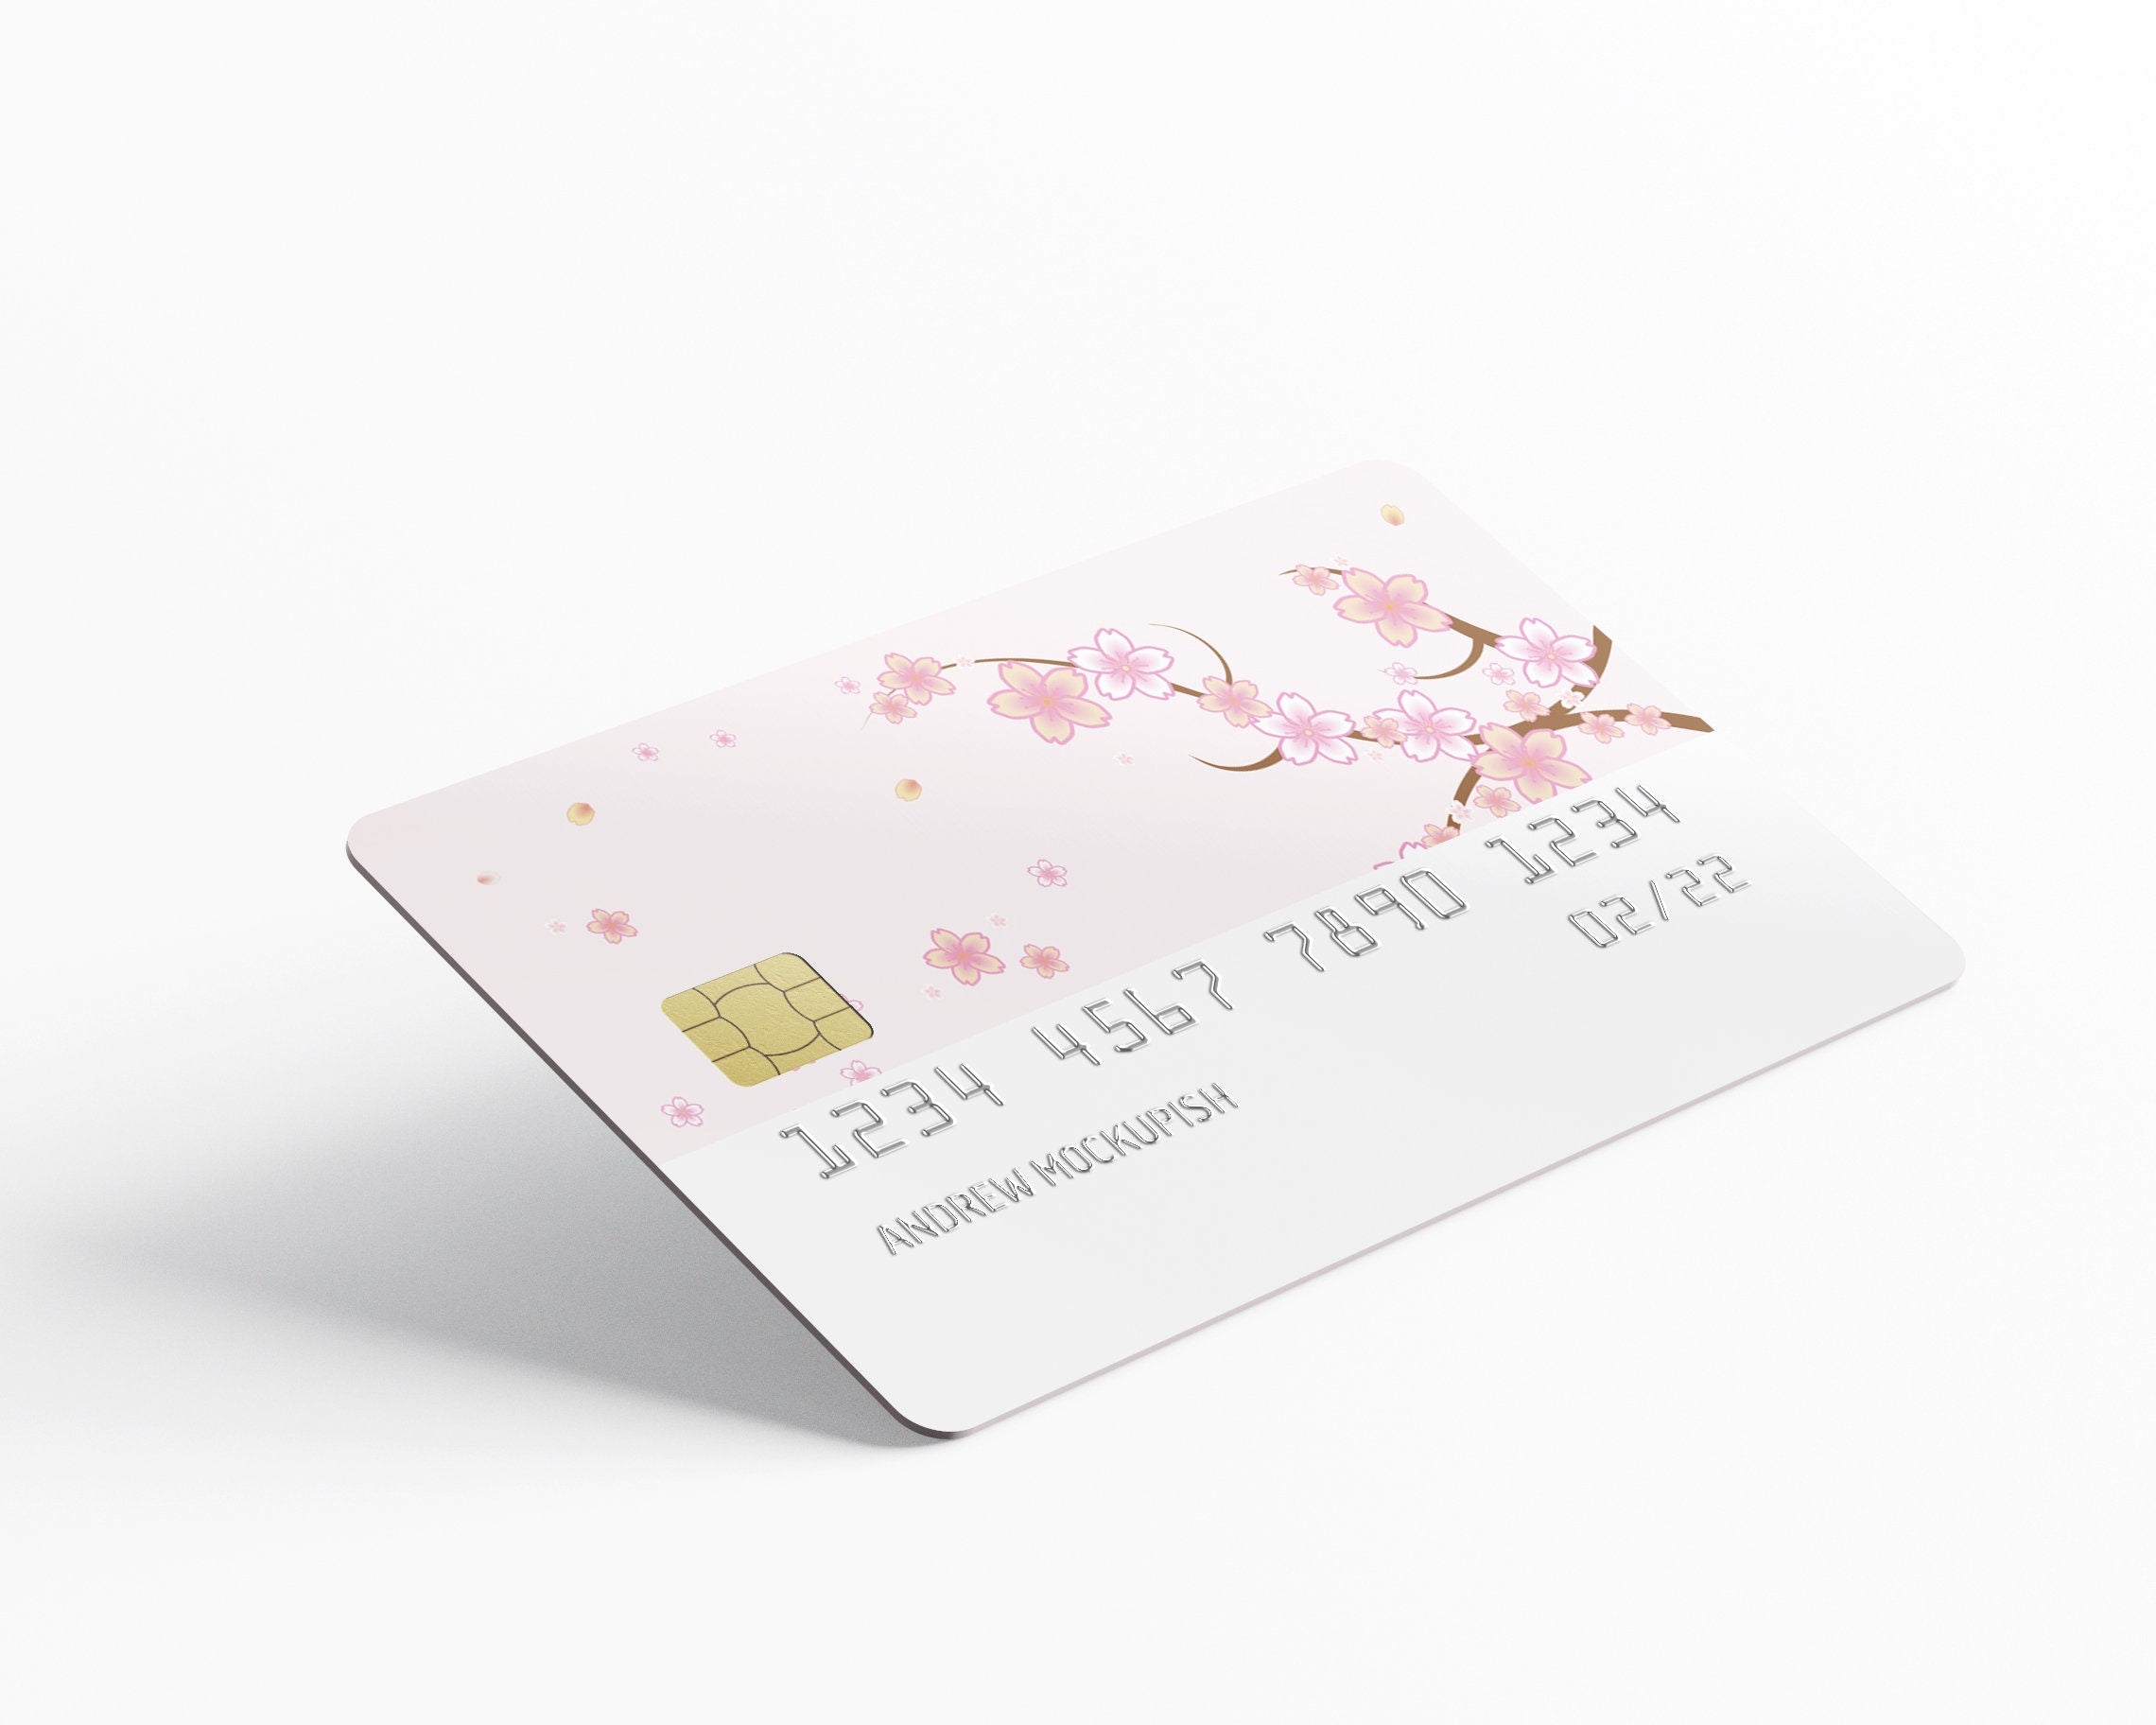  siayaharu Heart Credit Card Stickers Skin No Bubble Slim  Waterproof Anti-Wrinkling Removable Vinyl Debit Card Skin Cover Credit Card  Decals : Office Products